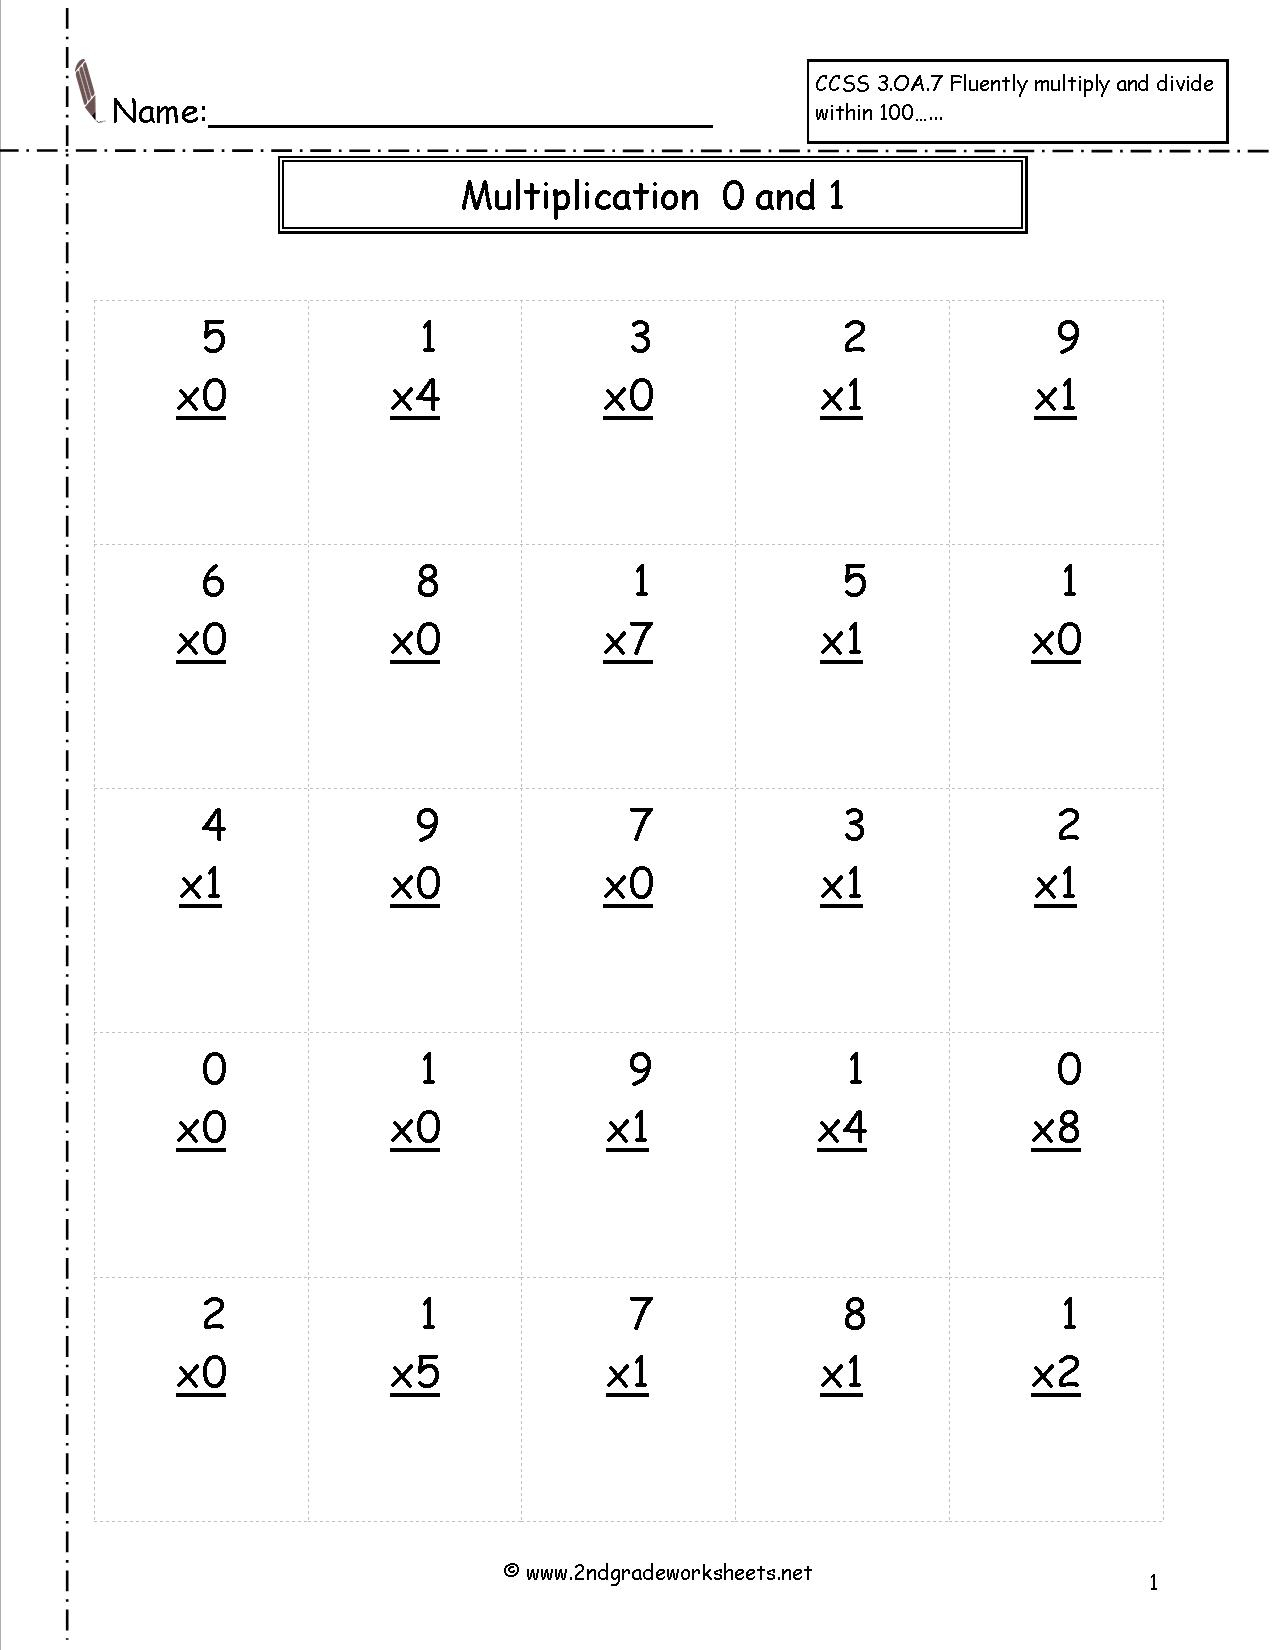 Multiplication Worksheets And Printouts regarding Printable Grade 4 Multiplication Worksheets